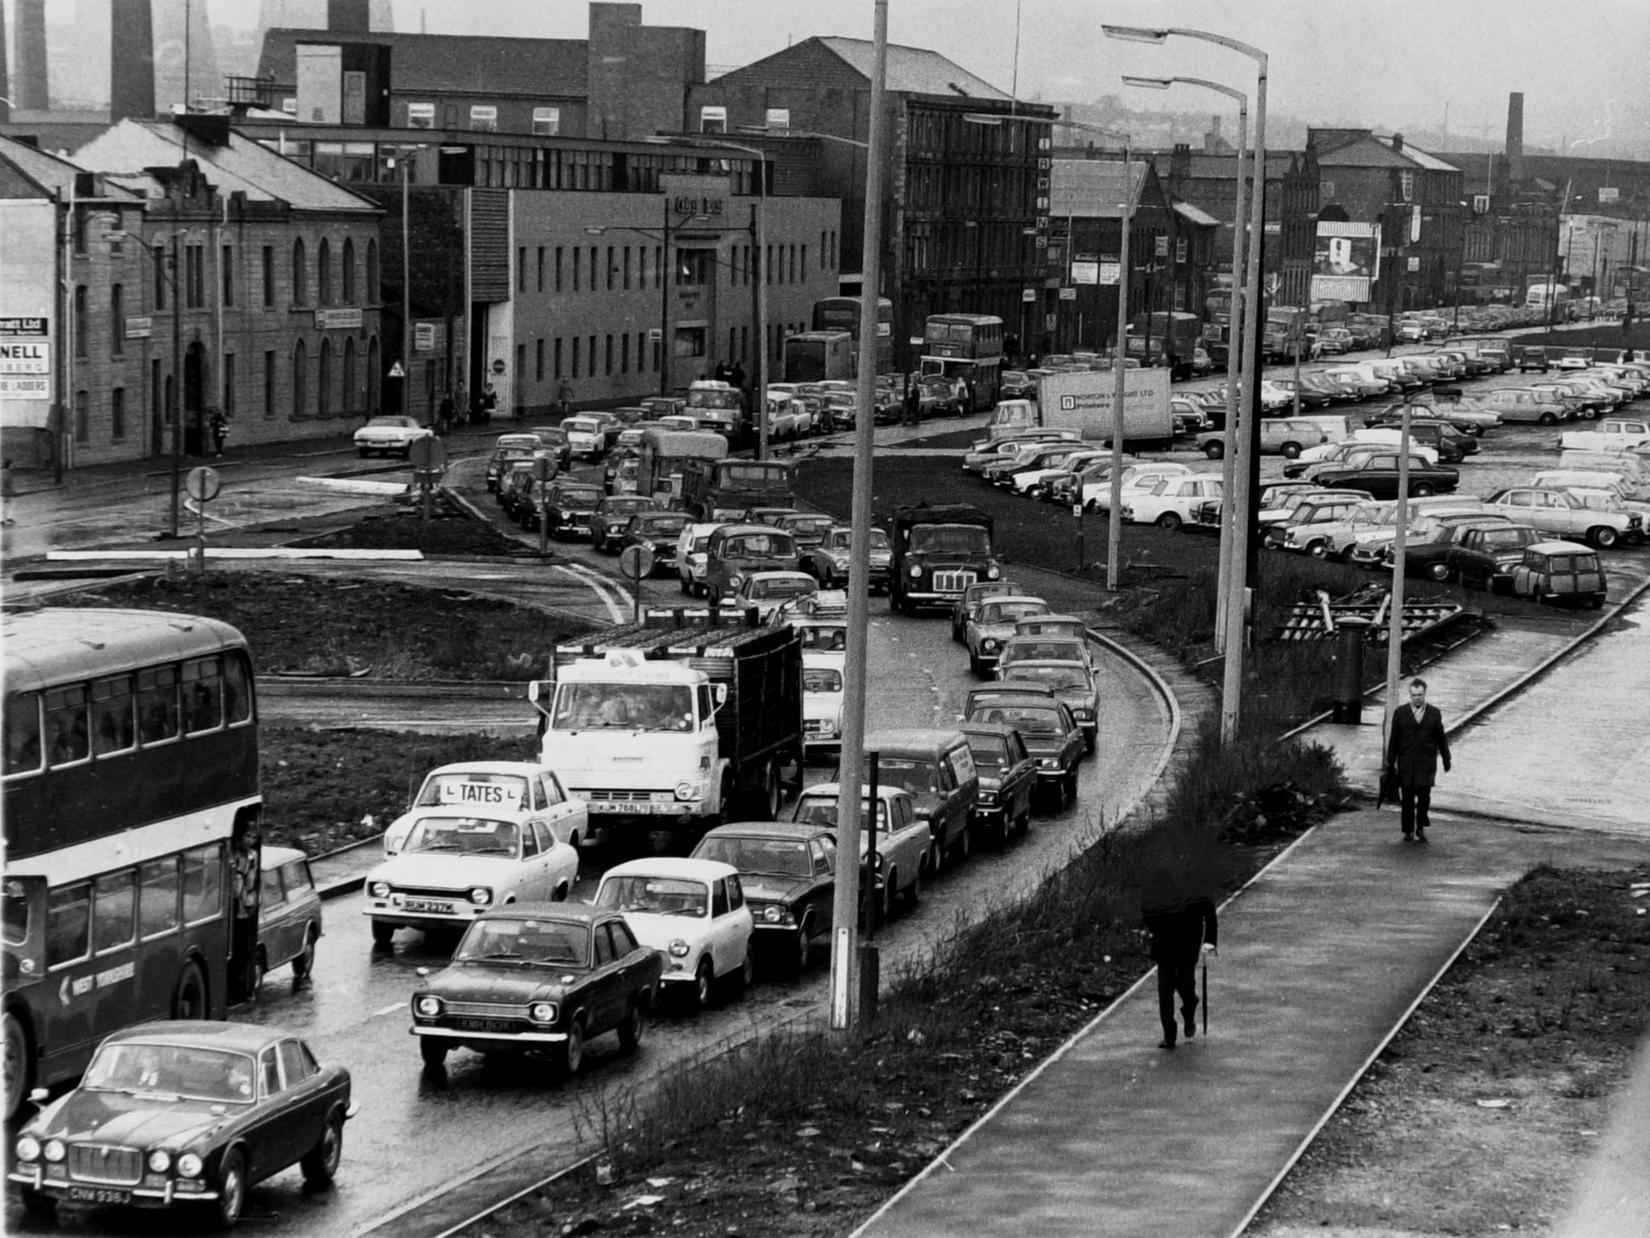 Queing traffic along Kirkstall Road in the mid-1970s.